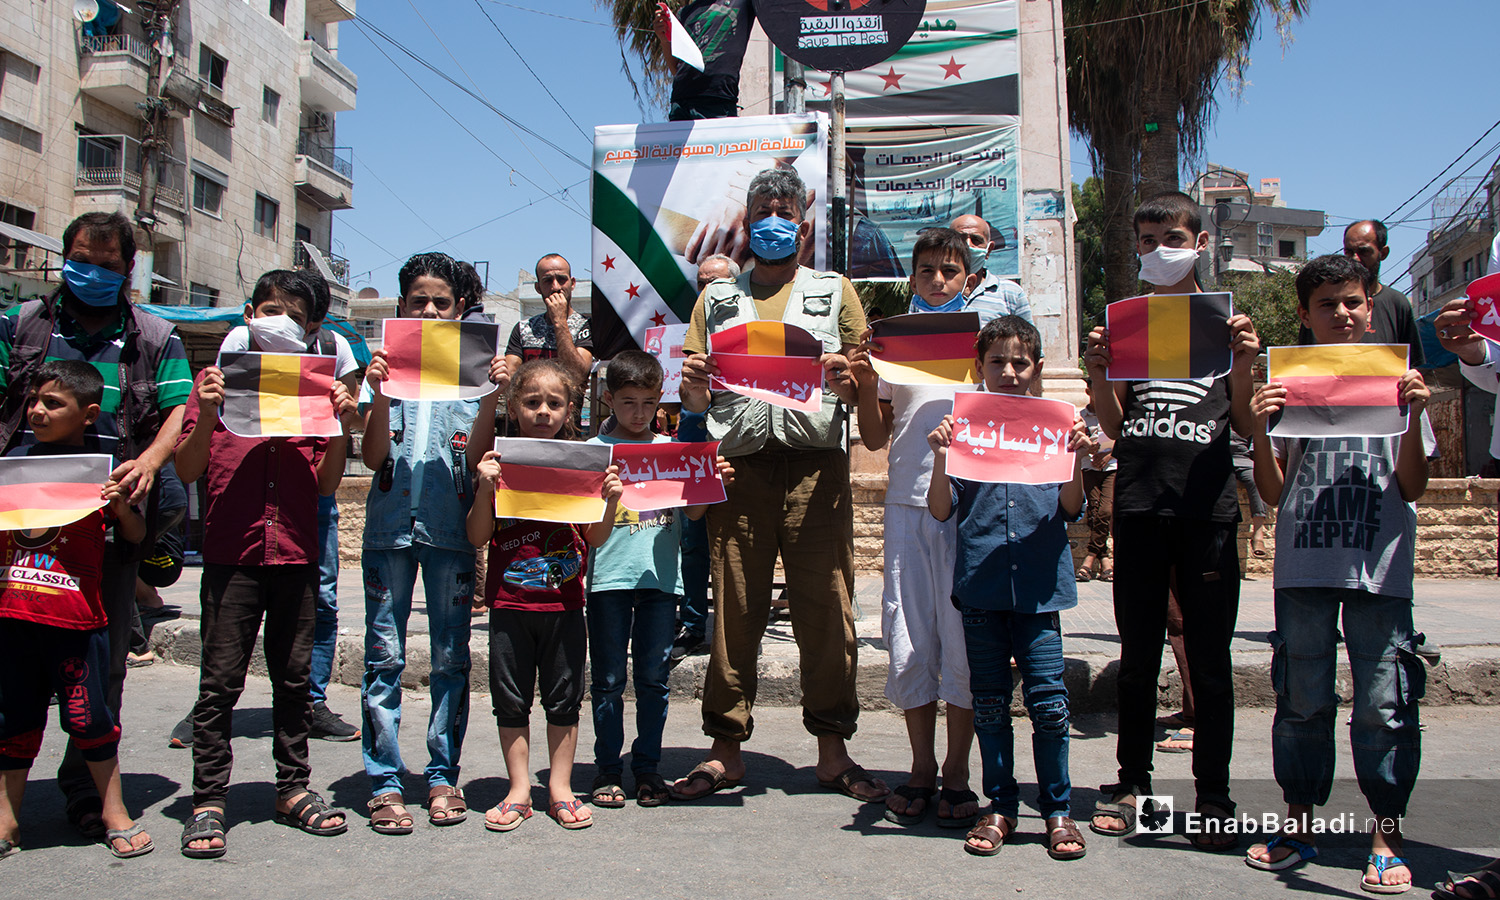 Children and young men carrying signs during a protest stand in Idlib city – 17 July 2020 (Enab Baladi / Anas al-Khouli)